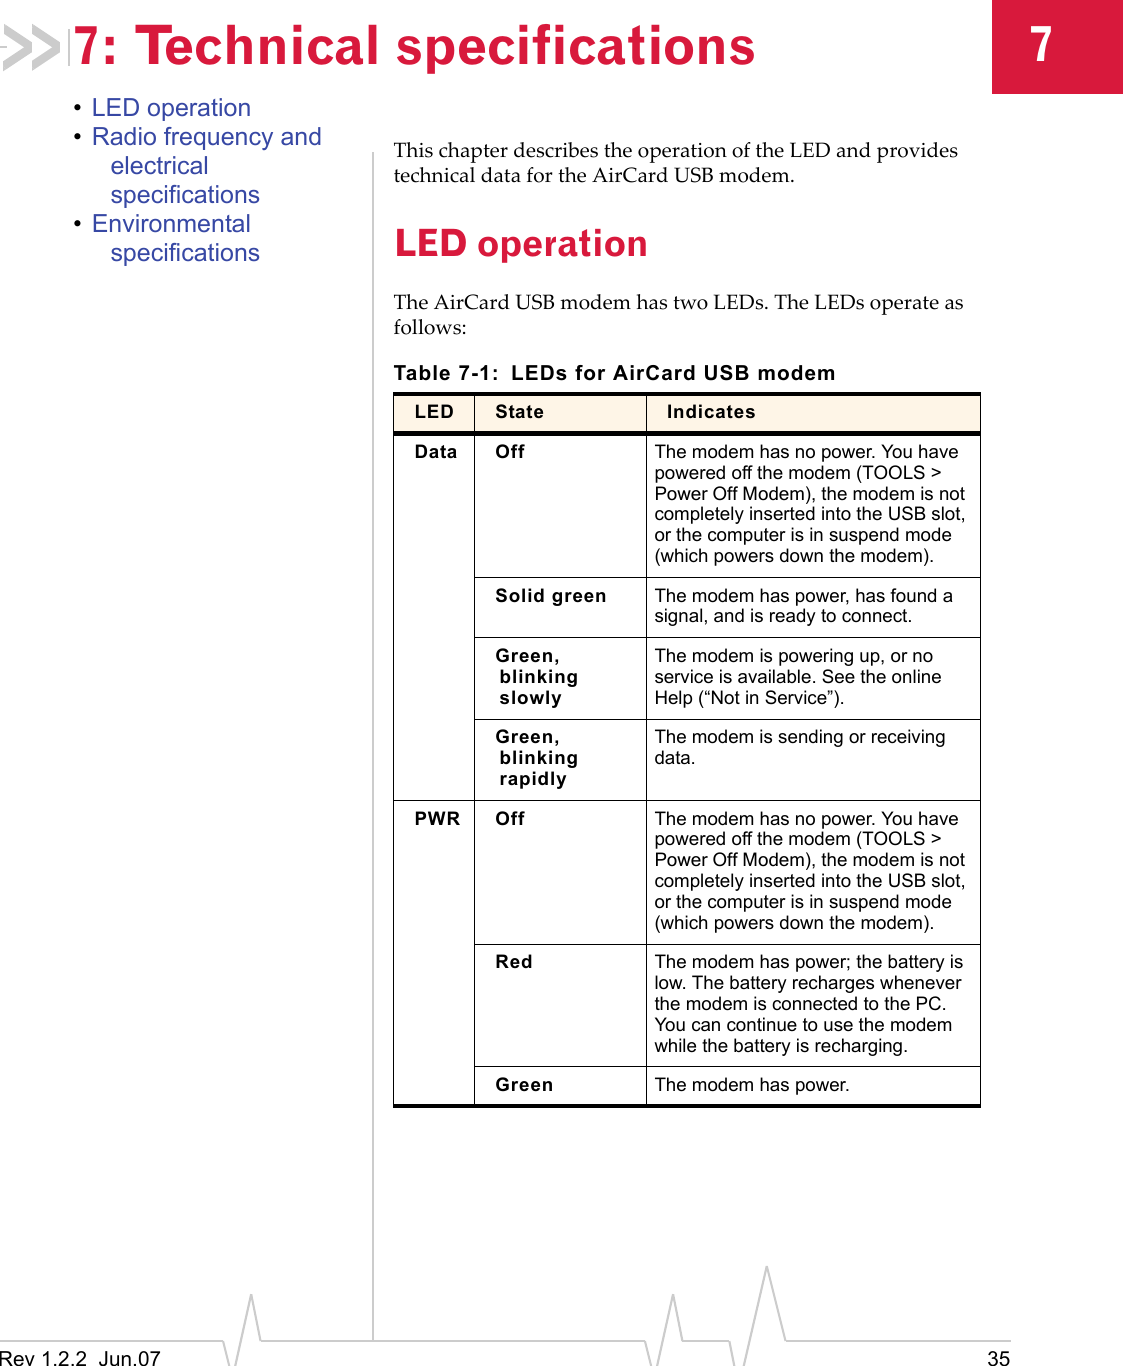 Rev 1.2.2  Jun.07 3577: Technical specifications•LED operation•Radio frequency and electrical specifications•Environmental specificationsThis chapter describes the operation of the LED and provides technical data for the AirCard USB modem.LED operationThe AirCard USB modem has two LEDs. The LEDs operate as follows:Table 7-1: LEDs for AirCard USB modemLED State IndicatesData Off The modem has no power. You have powered off the modem (TOOLS &gt; Power Off Modem), the modem is not completely inserted into the USB slot, or the computer is in suspend mode (which powers down the modem).Solid green The modem has power, has found a signal, and is ready to connect. Green,blinking slowlyThe modem is powering up, or no service is available. See the online Help (“Not in Service”). Green,blinking rapidlyThe modem is sending or receiving data. PWR Off The modem has no power. You have powered off the modem (TOOLS &gt; Power Off Modem), the modem is not completely inserted into the USB slot, or the computer is in suspend mode (which powers down the modem). Red The modem has power; the battery is low. The battery recharges whenever the modem is connected to the PC. You can continue to use the modem while the battery is recharging. Green The modem has power.